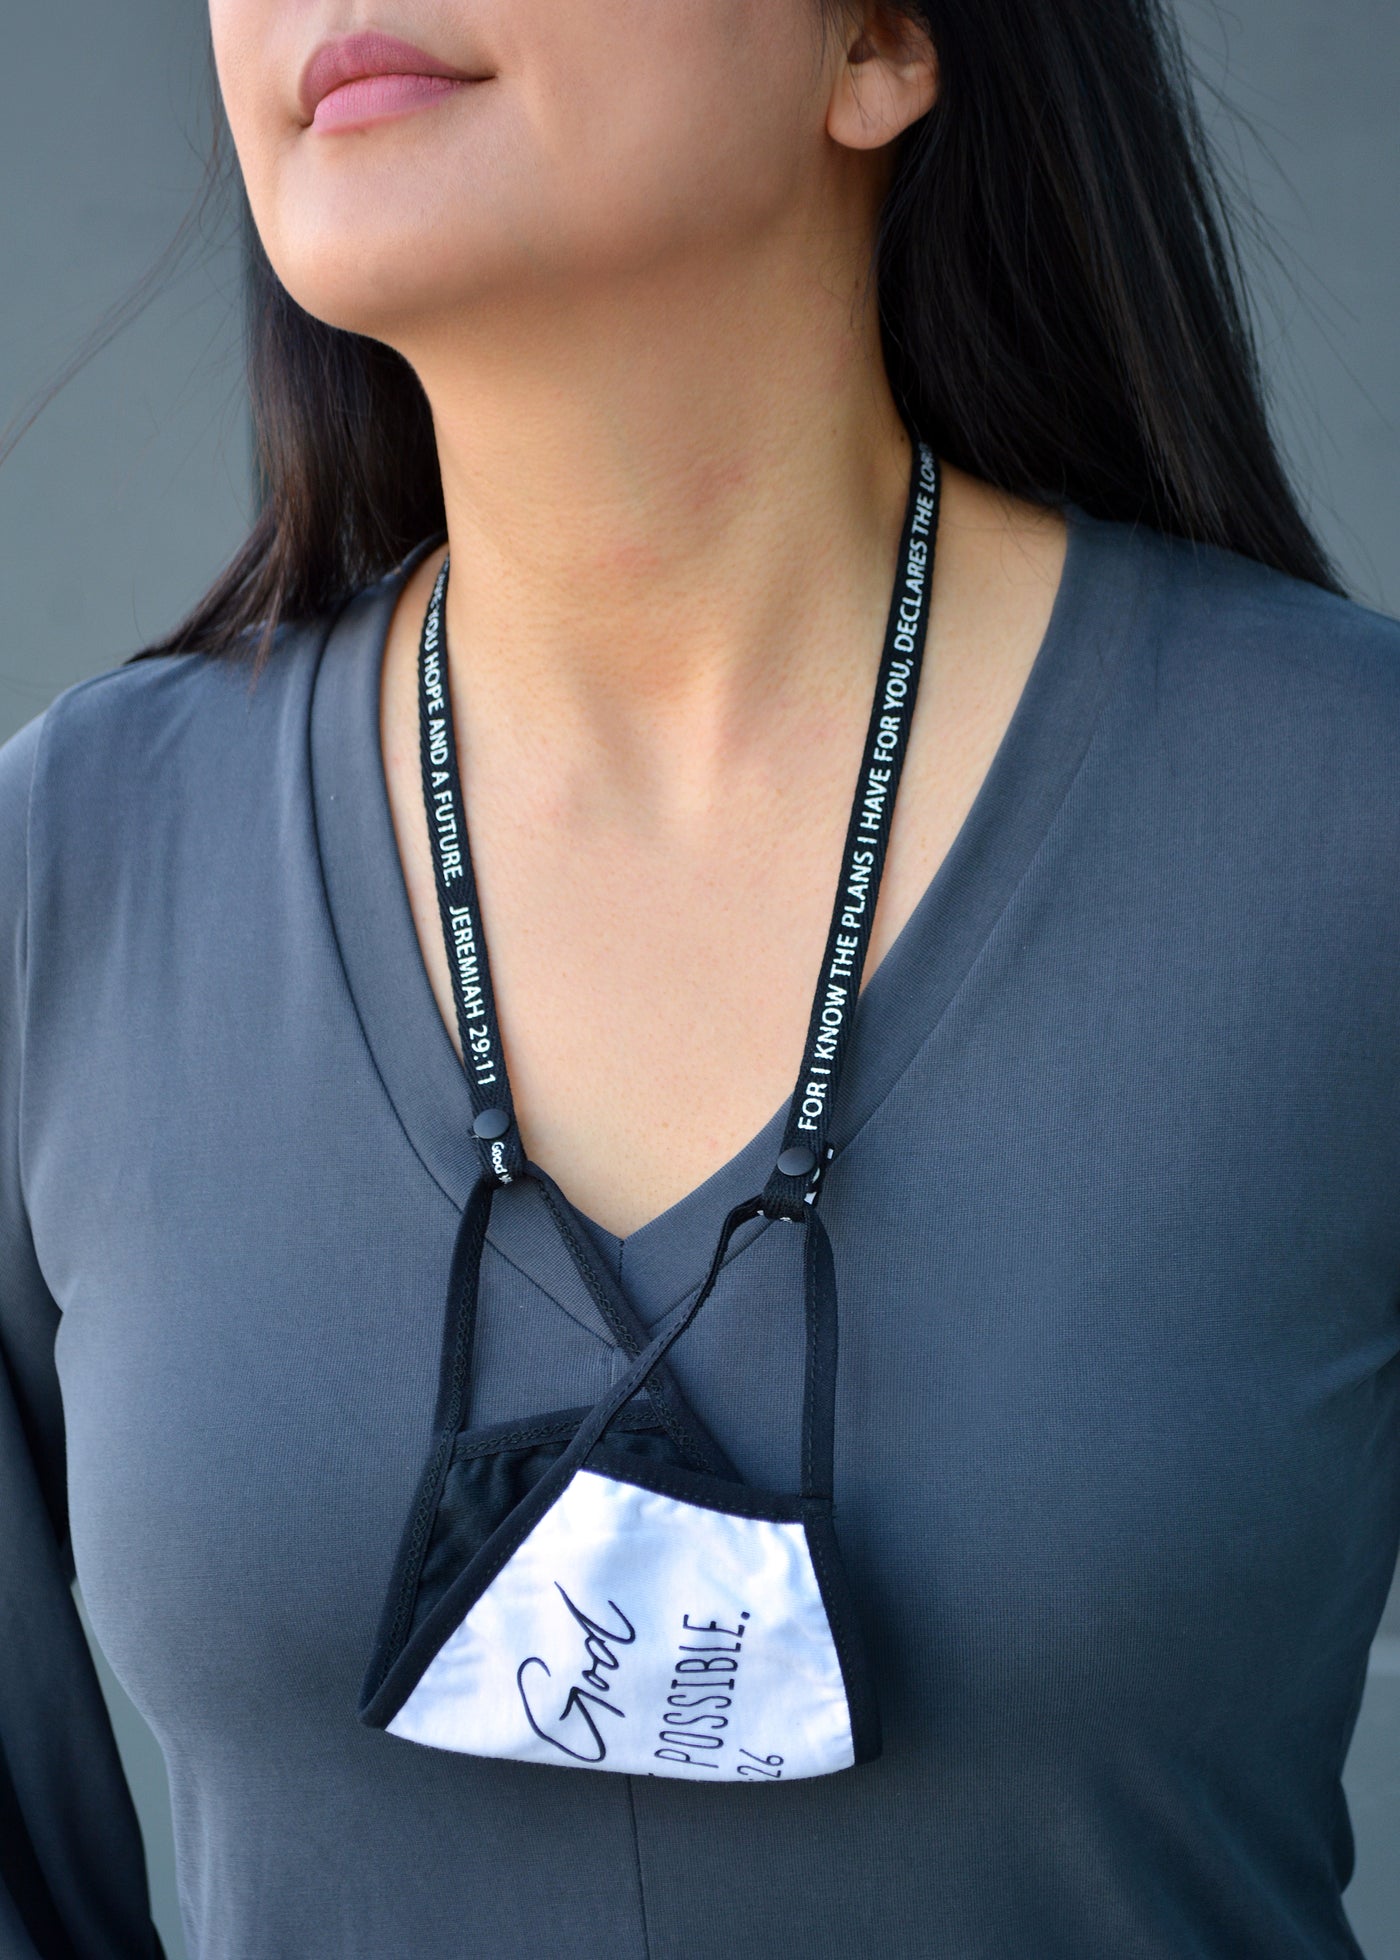 FACE MASK LANYARD - BLACK - JEREMIAH 29:11-Good Work(s) Make A Difference® | Christian and Inspirational Jewelry Company in Vernon, California